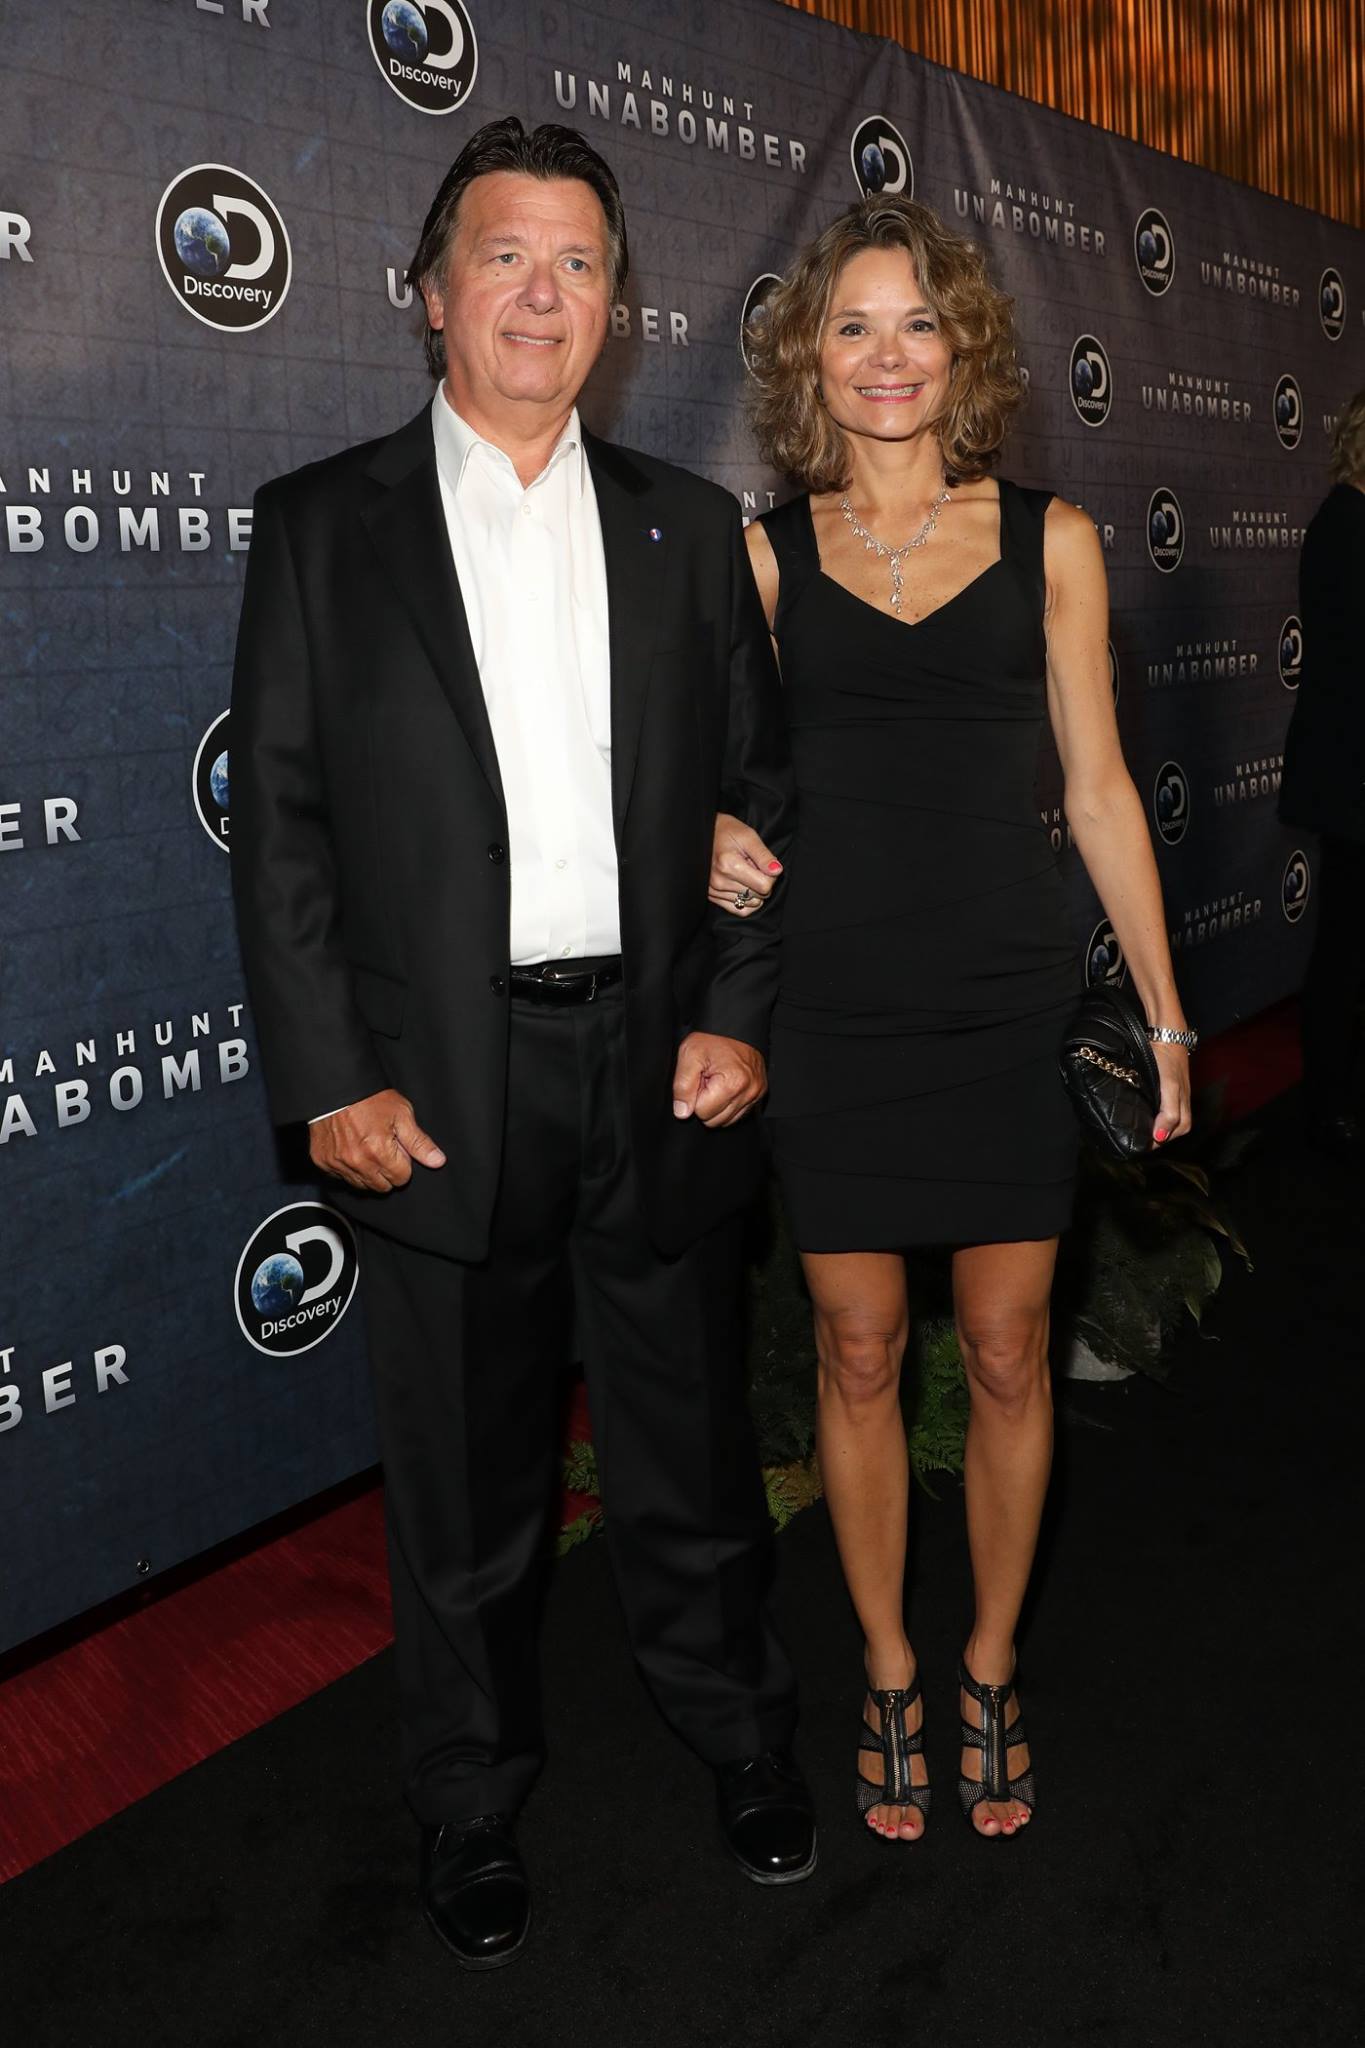 James Fitzgerald with his wife Natalie Schilling